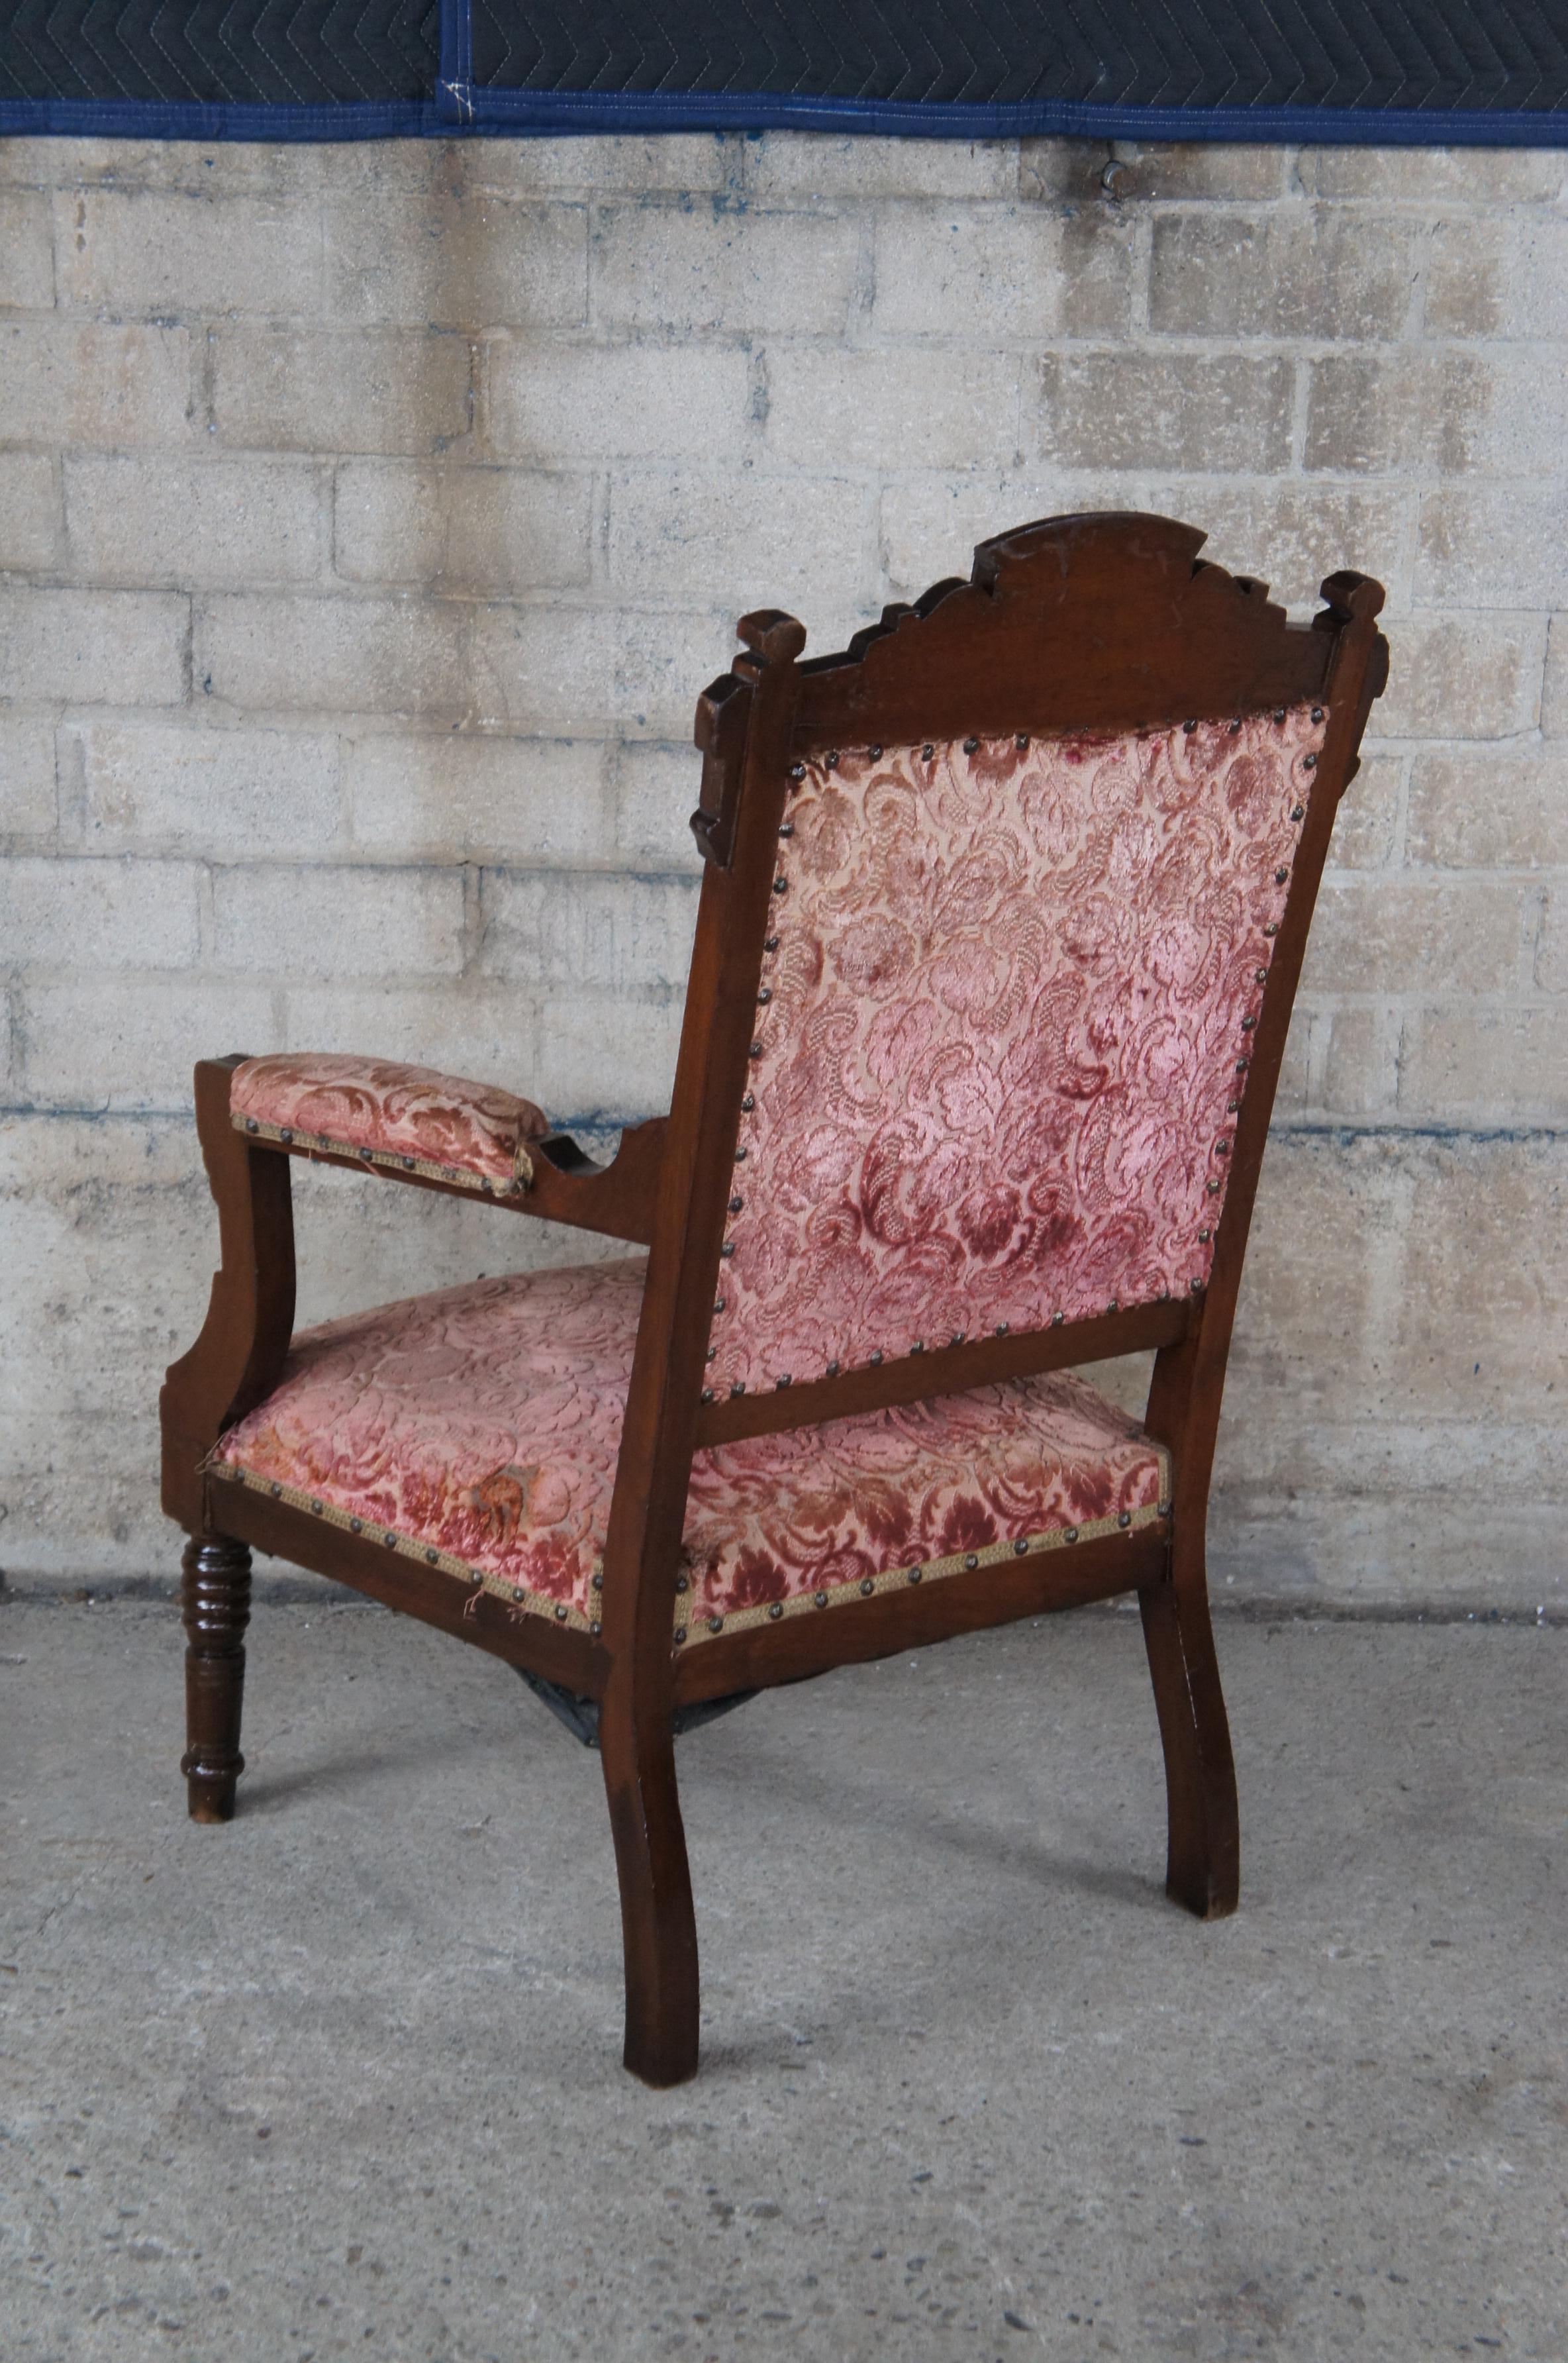 19th Century Antique Victorian Eastlake Carved Walnut Gentleman's Parlor Fauteuil Arm Chair For Sale